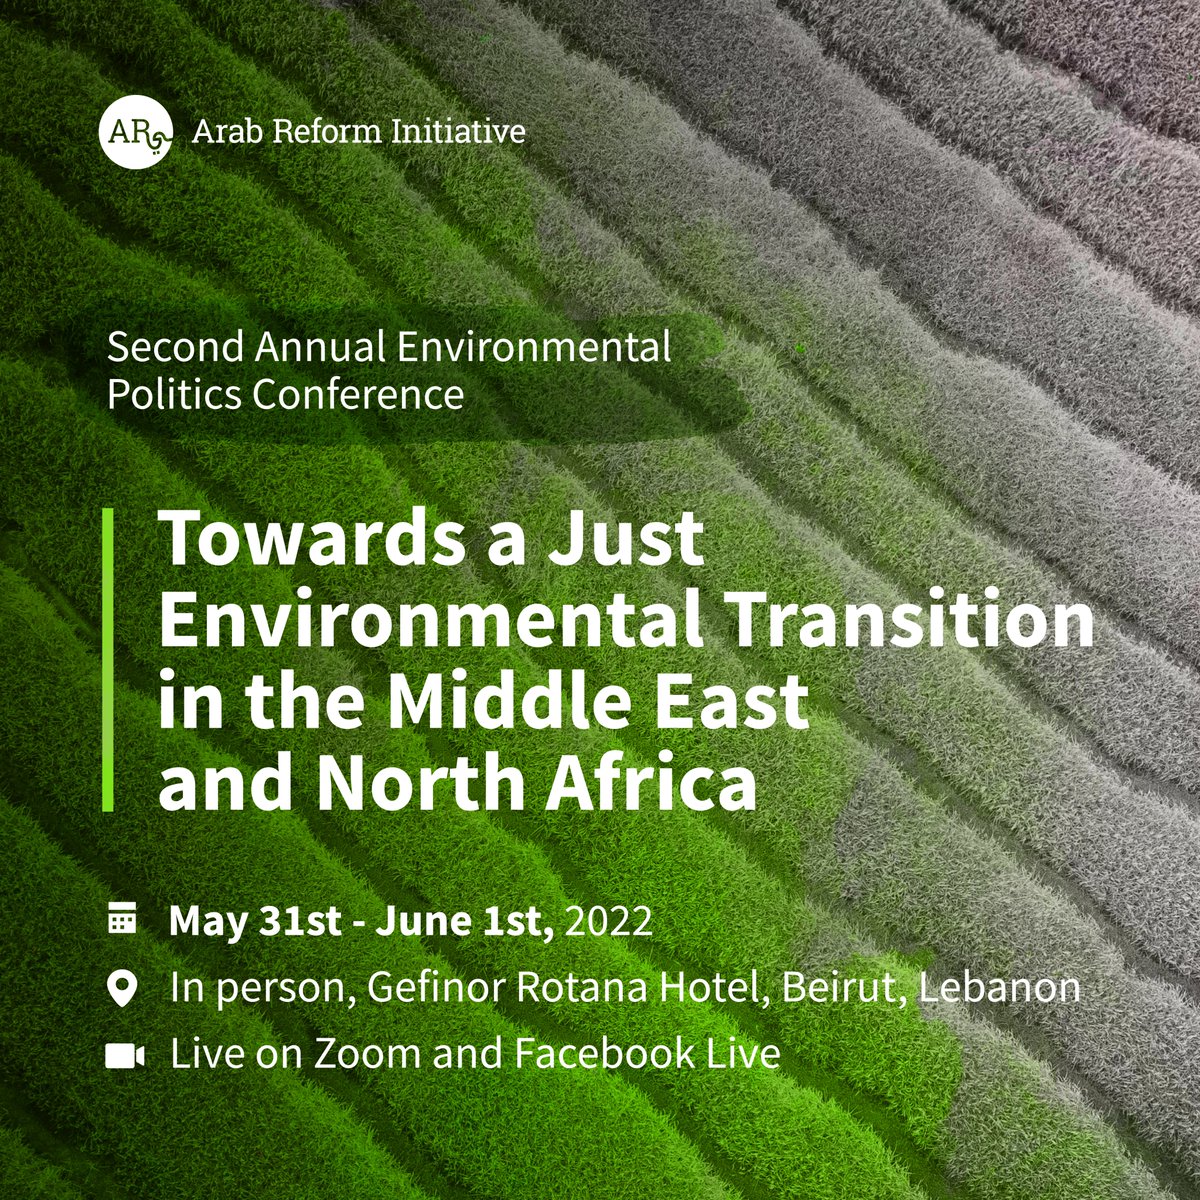 Some interesting sessions here for those following environmental issues in #Iraq, #Libya, #OPT, #Syria and #Yemen. 